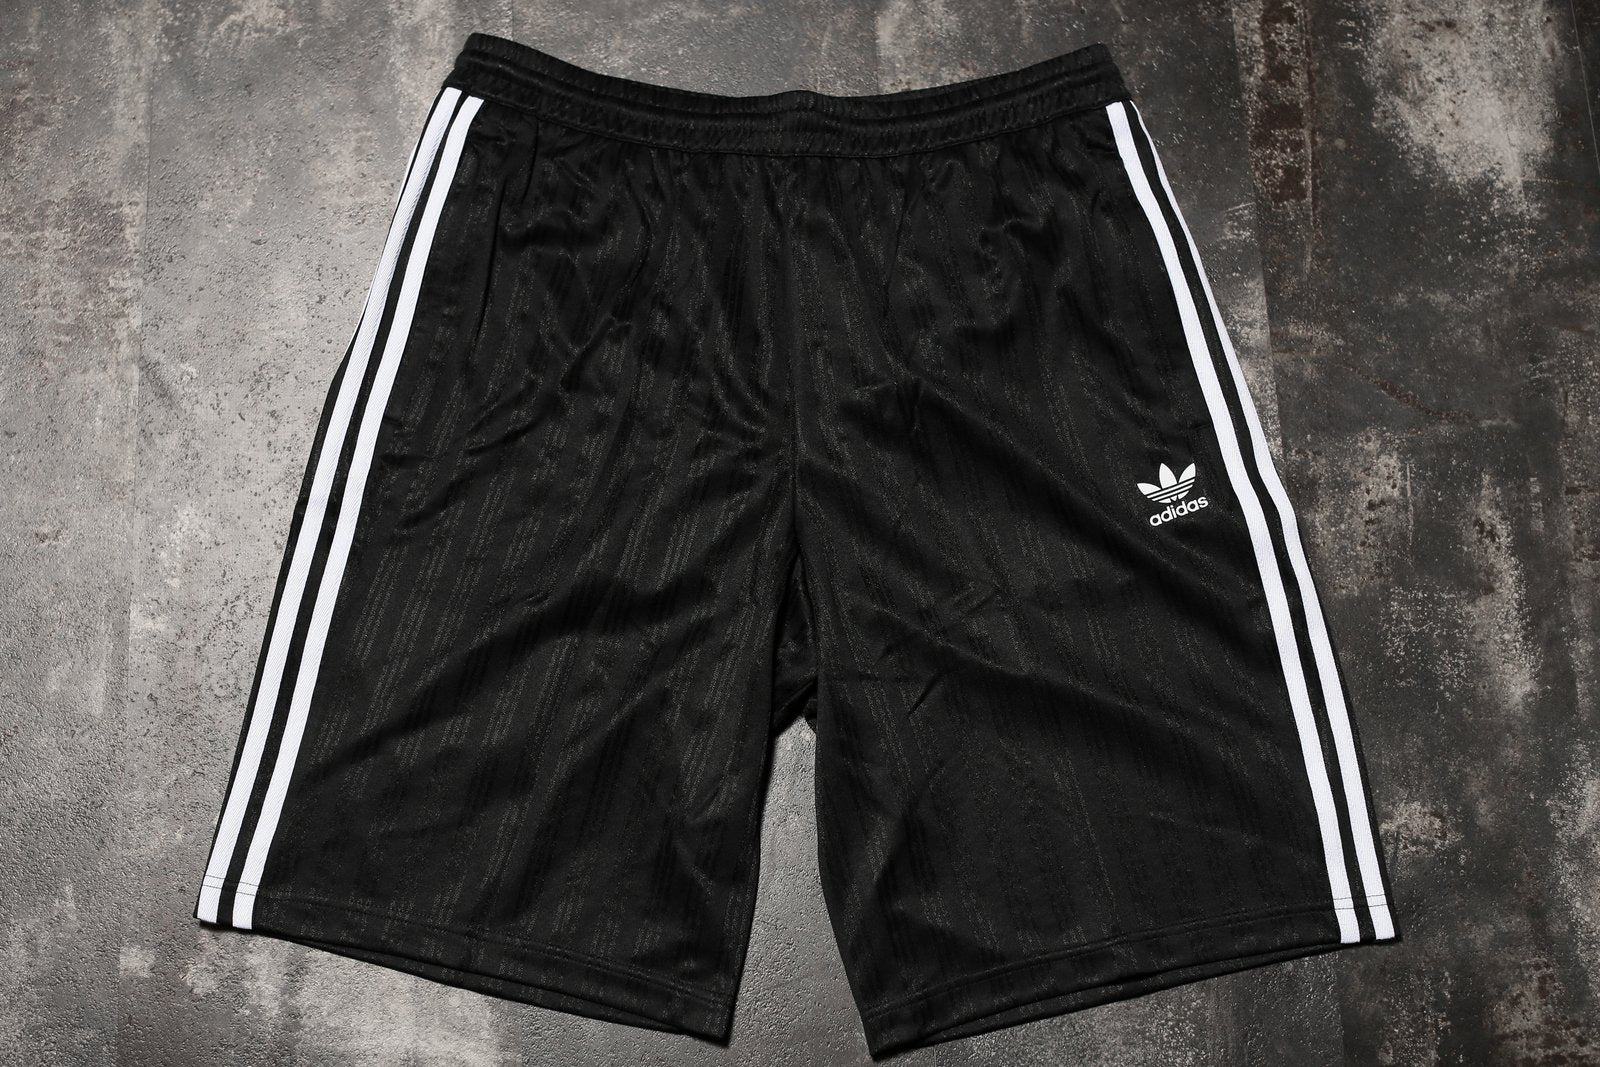 Adidas Football Shorts - Oneness Boutique